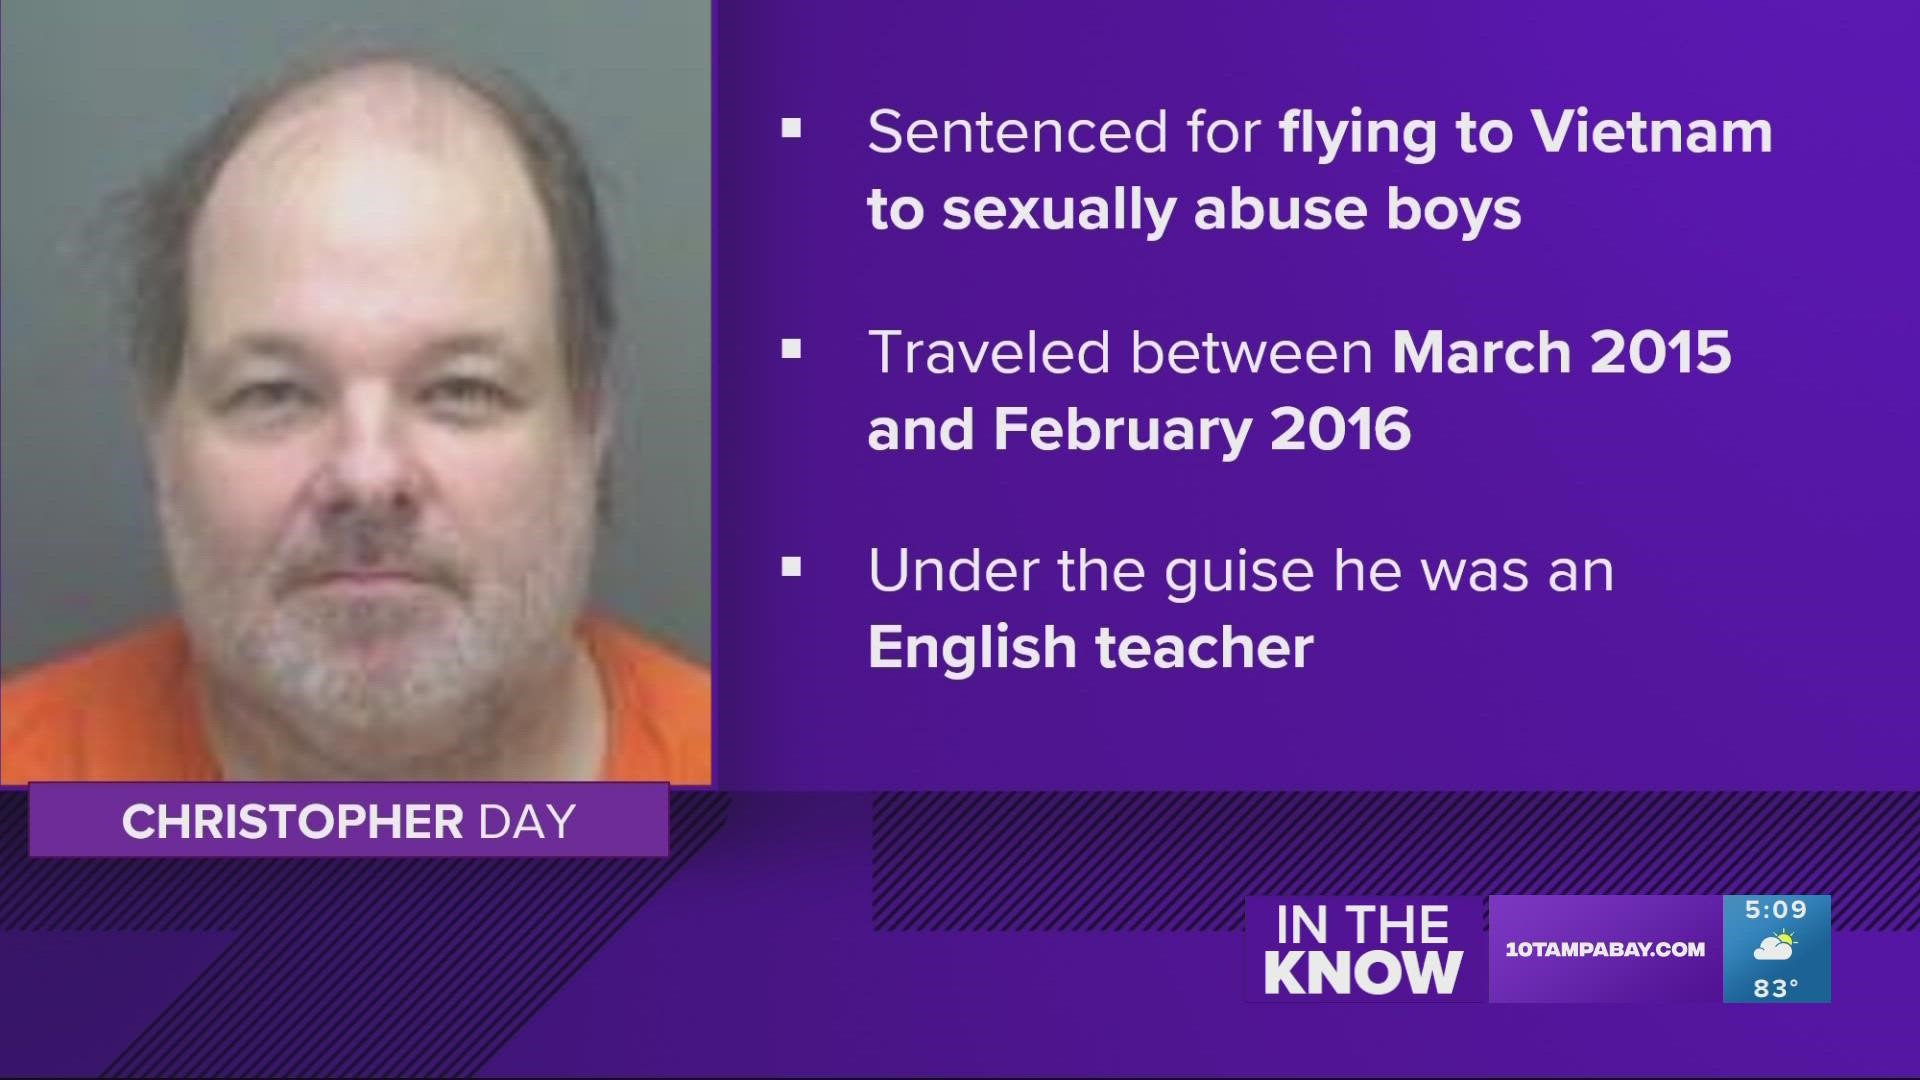 Prosecutors say he traveled under the guise that he was an English teacher.